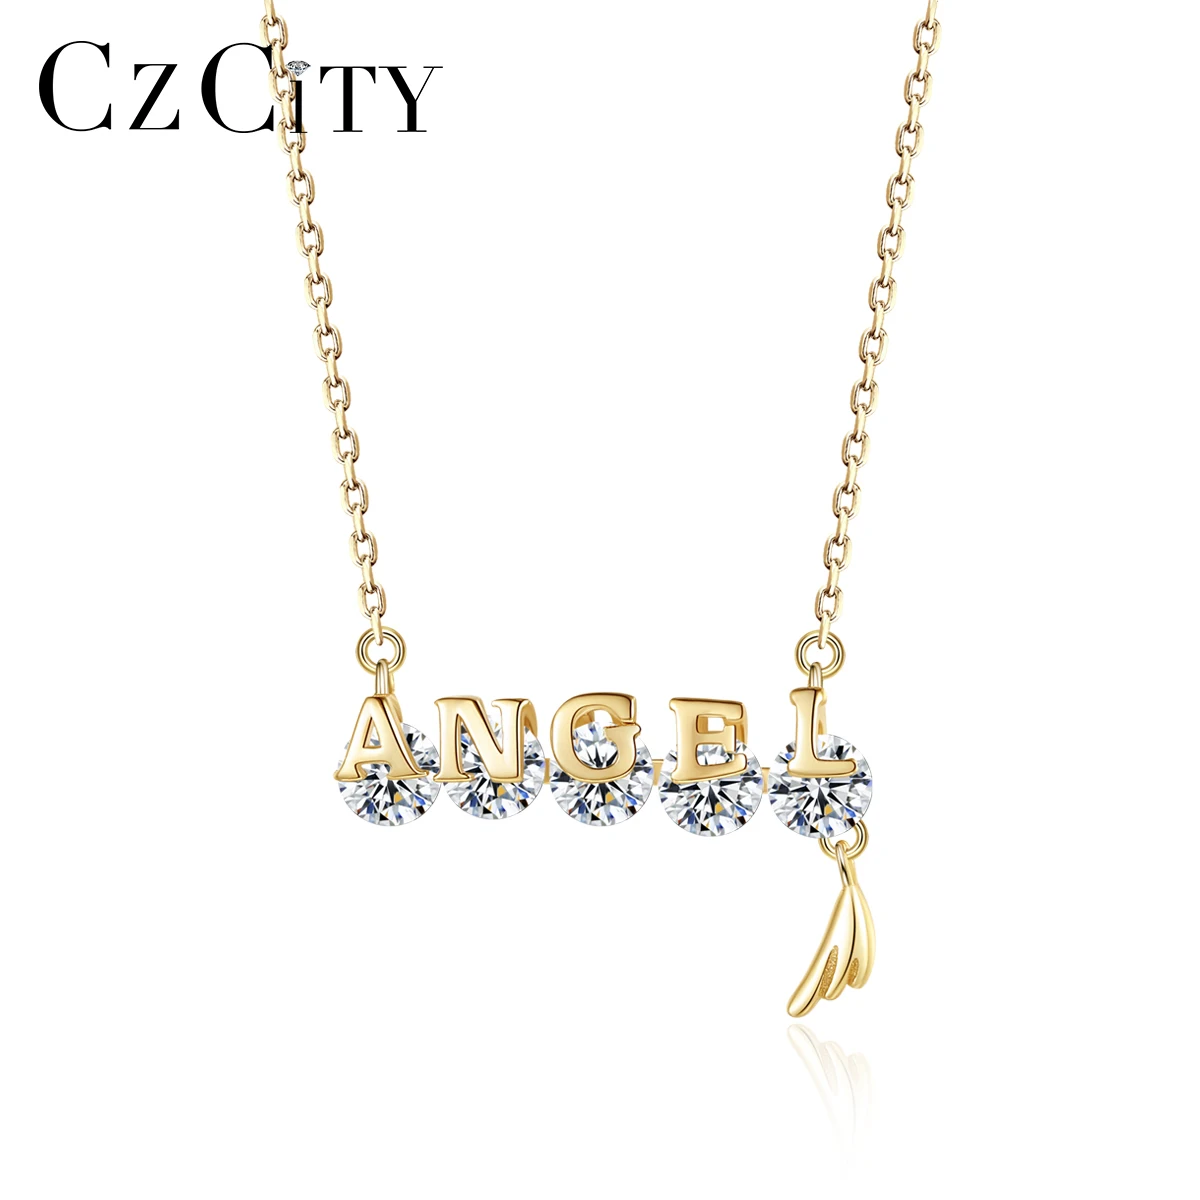 

CZCITY 925 Silver Jewelry Trendy Pendant S925 Chain Iced Out Woman Sterling Girl Designer Angel Letter Necklace